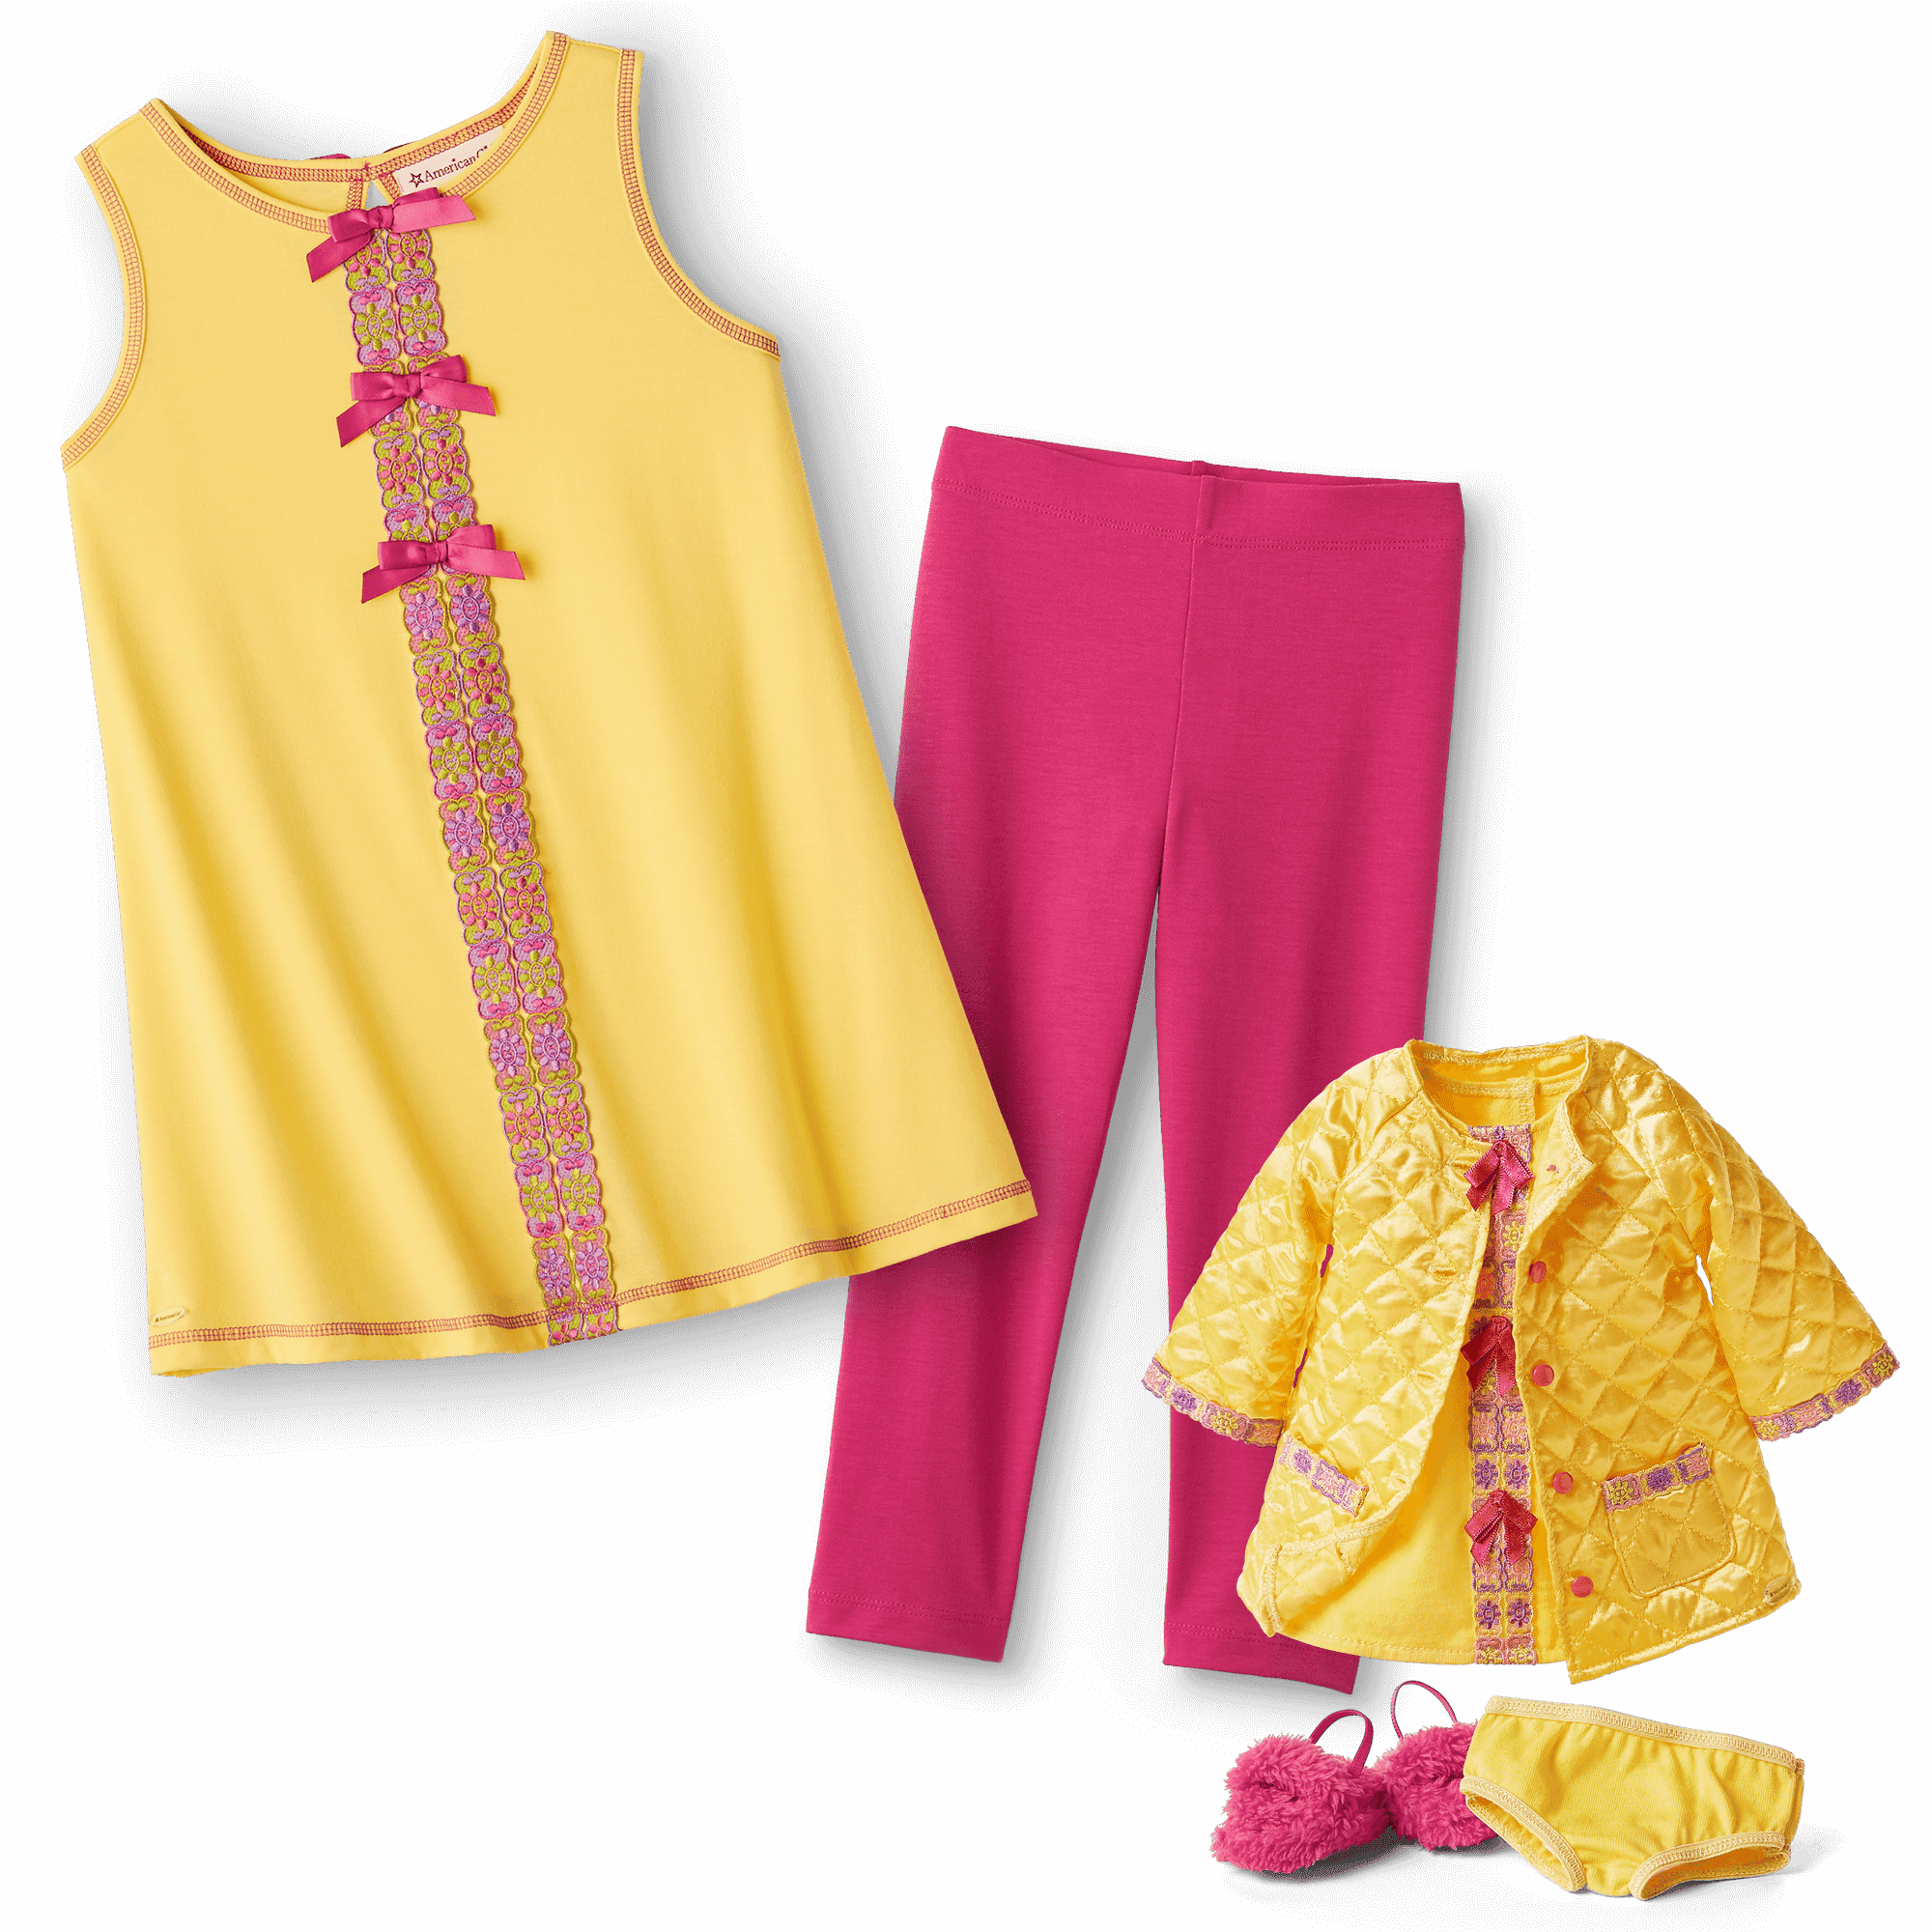 Julie's™ Pajamas for Girls and 18-inch Dolls